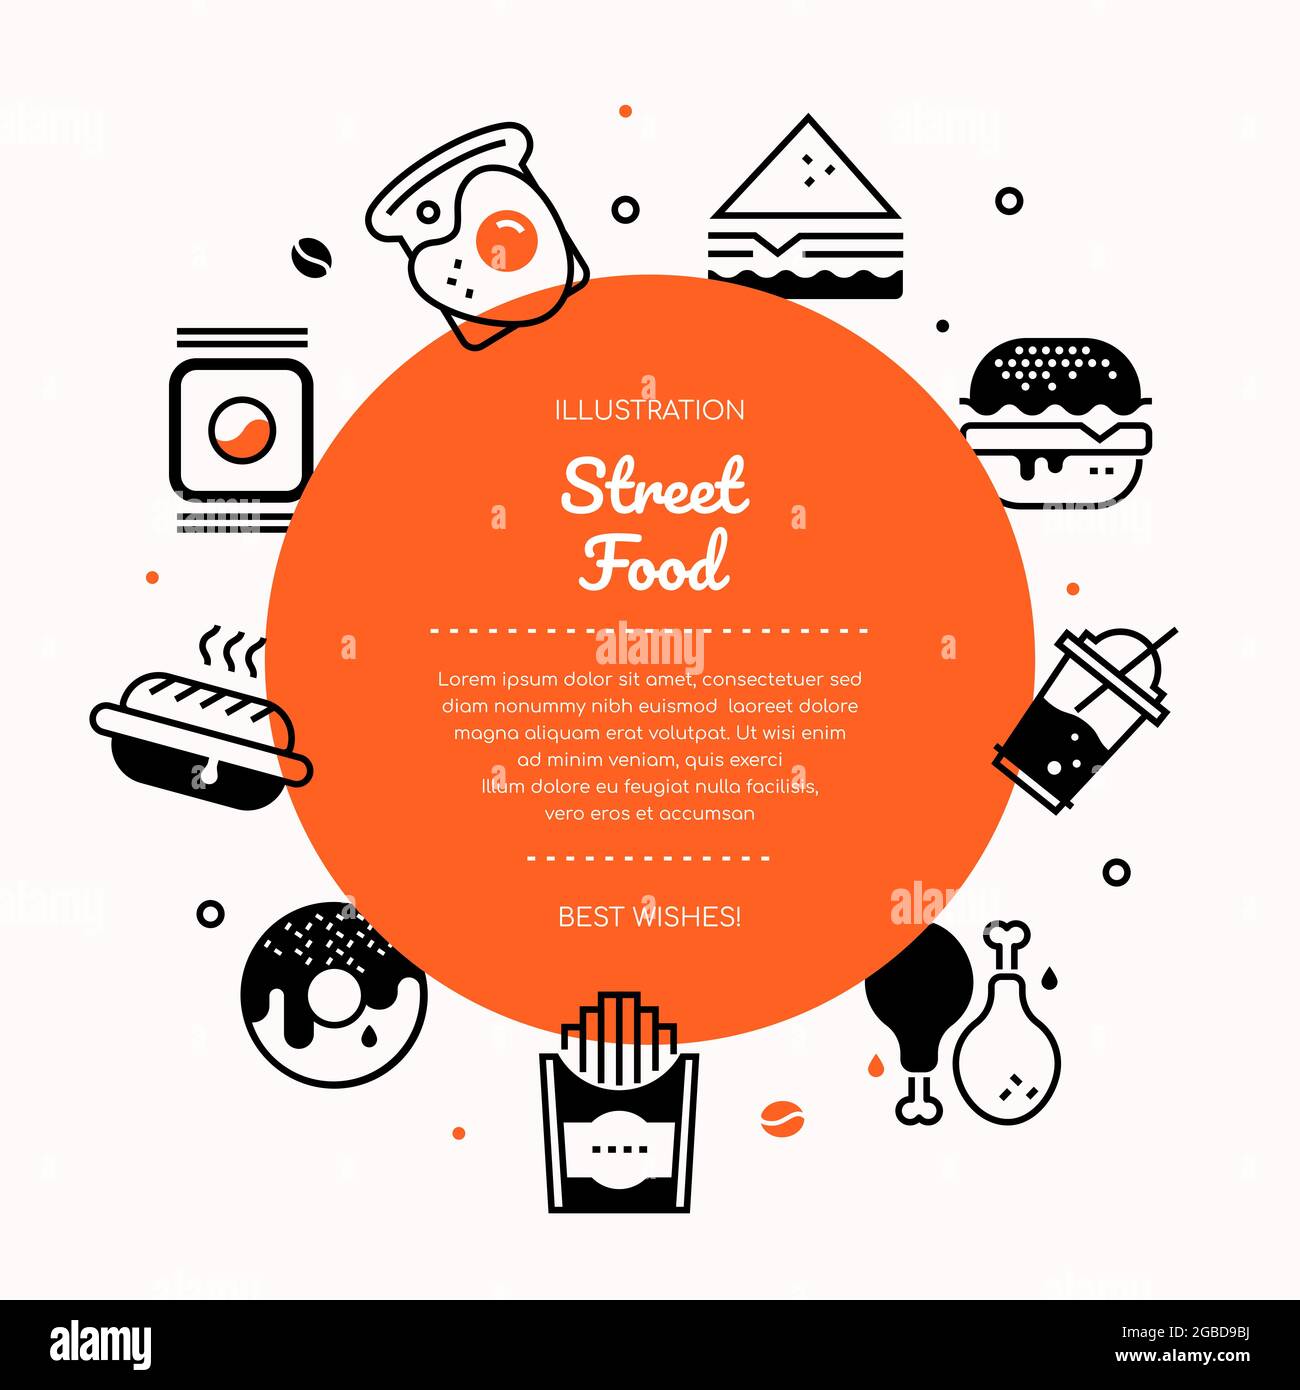 Street food - vector line design style poster with copy space for text. High quality, tasty, memorable images for cafe, restaurant, shop. Egg sandwich Stock Vector